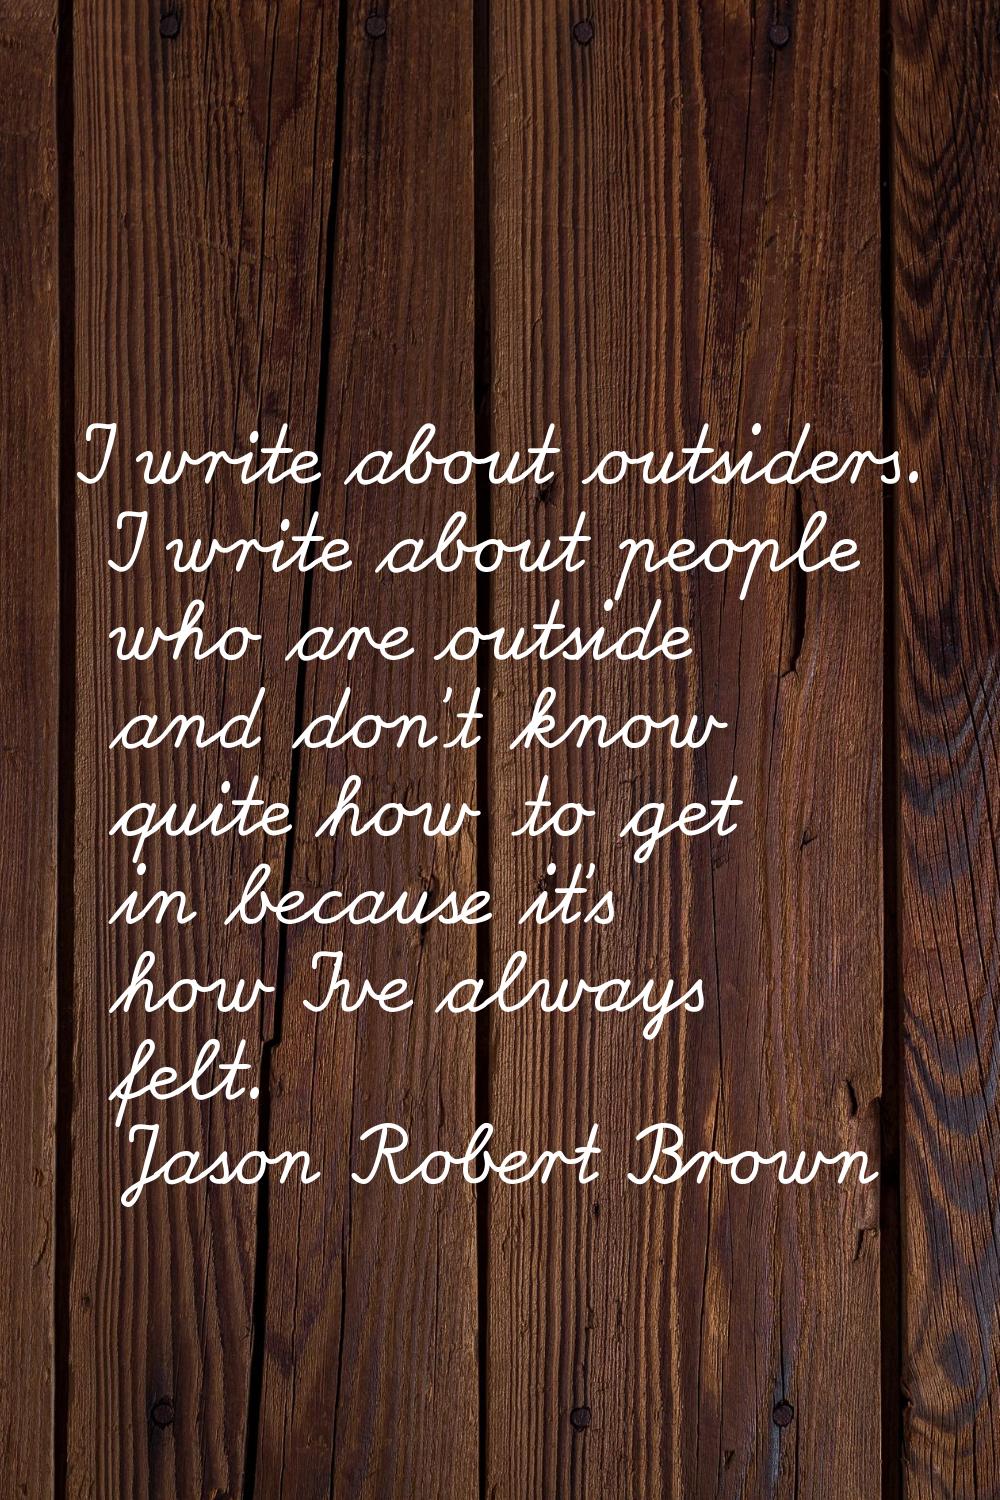 I write about outsiders. I write about people who are outside and don't know quite how to get in be